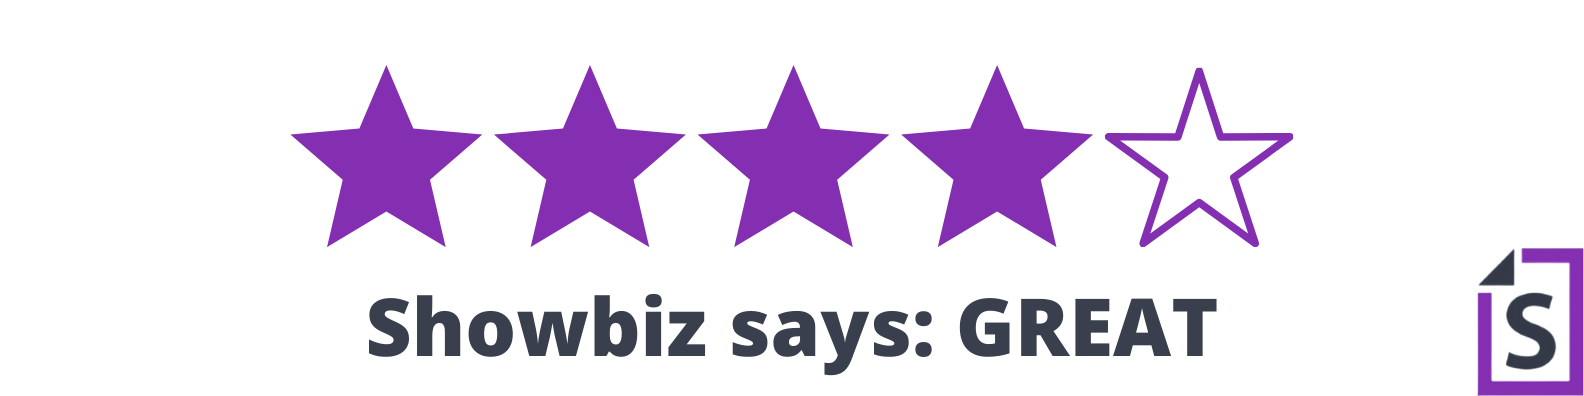 Showbiz Cheat Sheet four-star review with purple stars on white background.